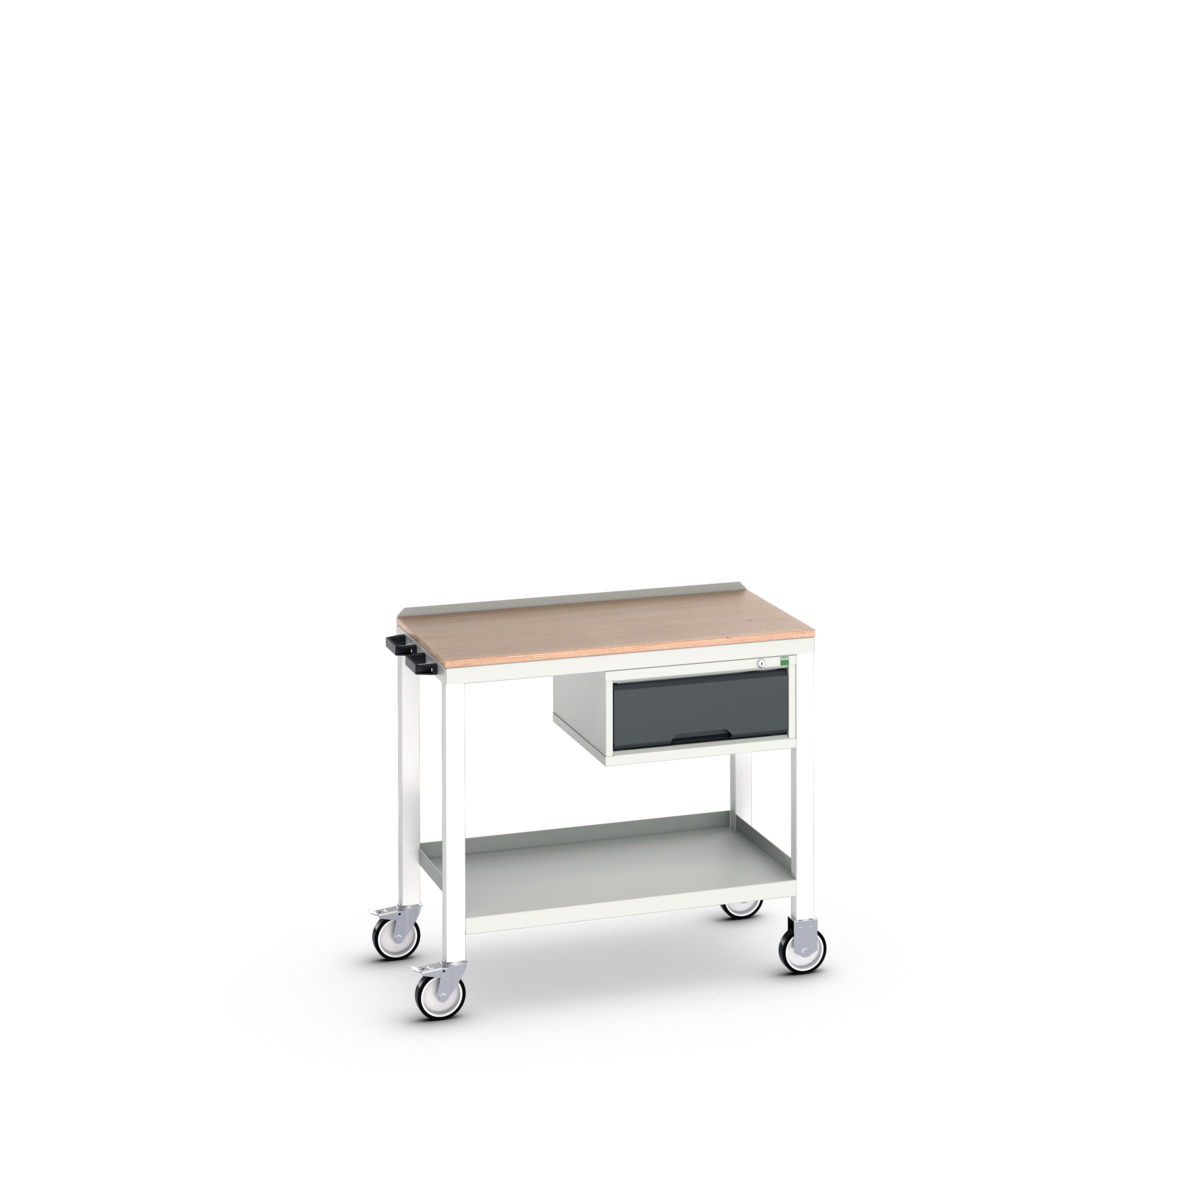 16922801.19 - verso mobile welded bench